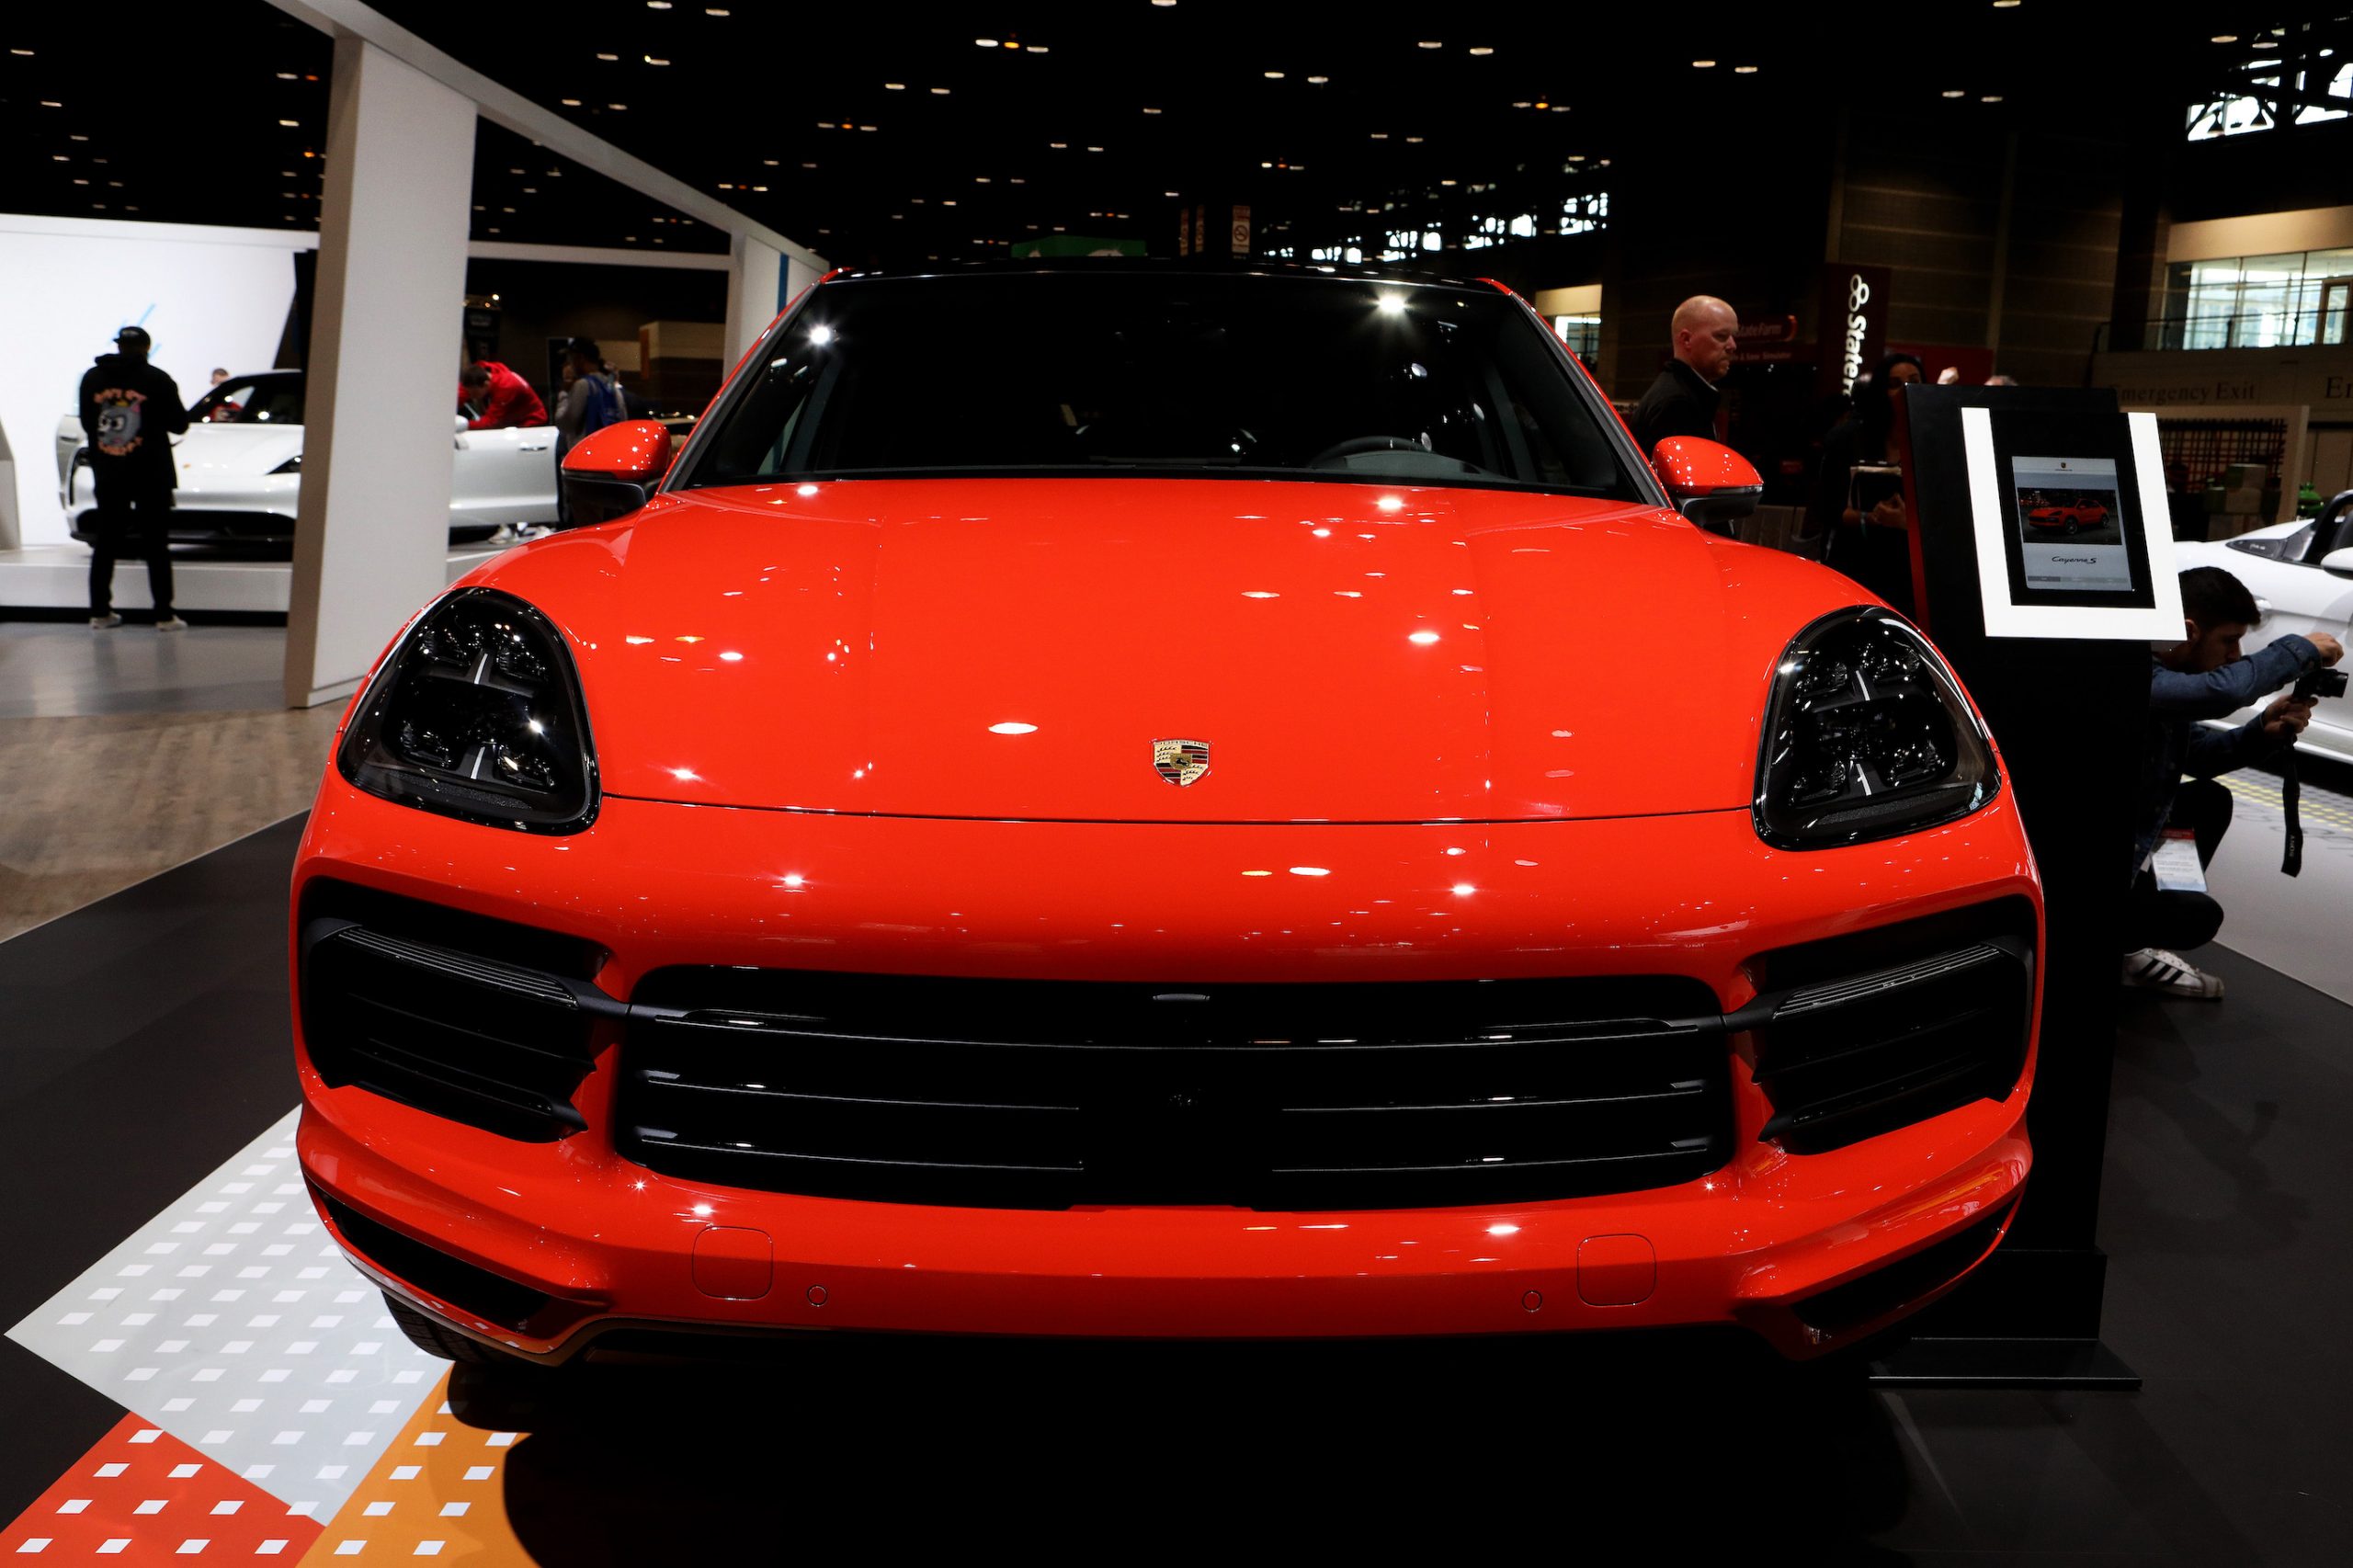 2020 Porsche Cayenne Coupé is on display at the 112th Annual Chicago Auto Show